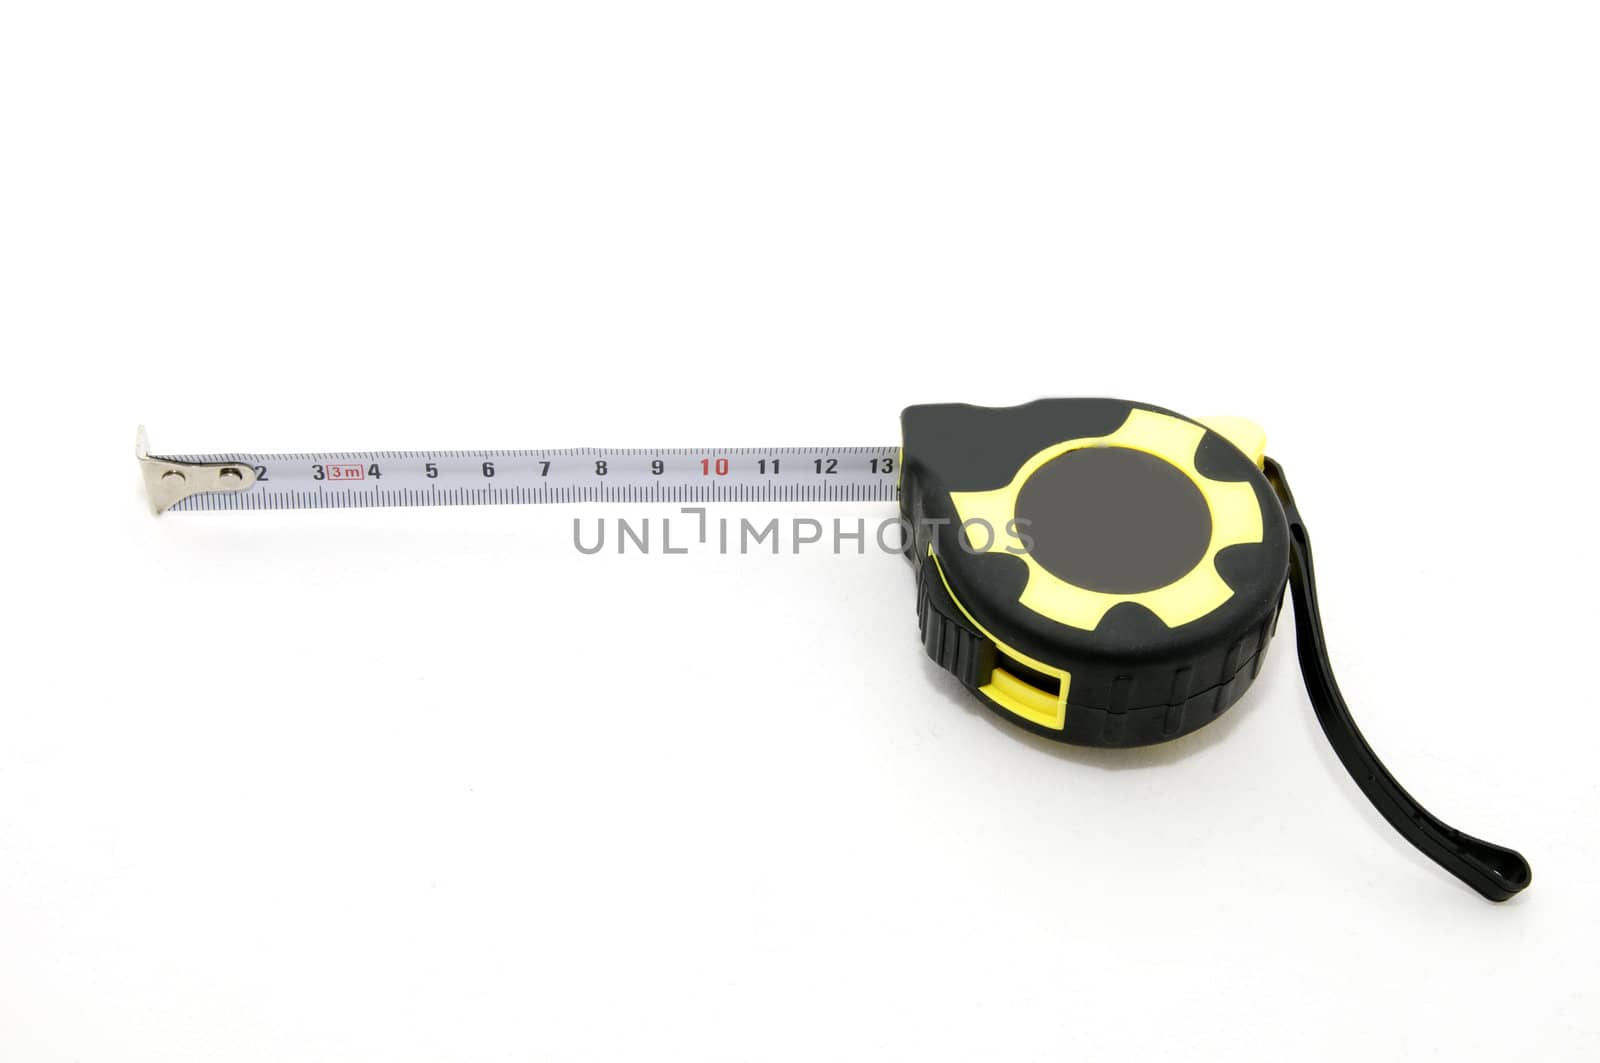 measuring instrument by Lester120